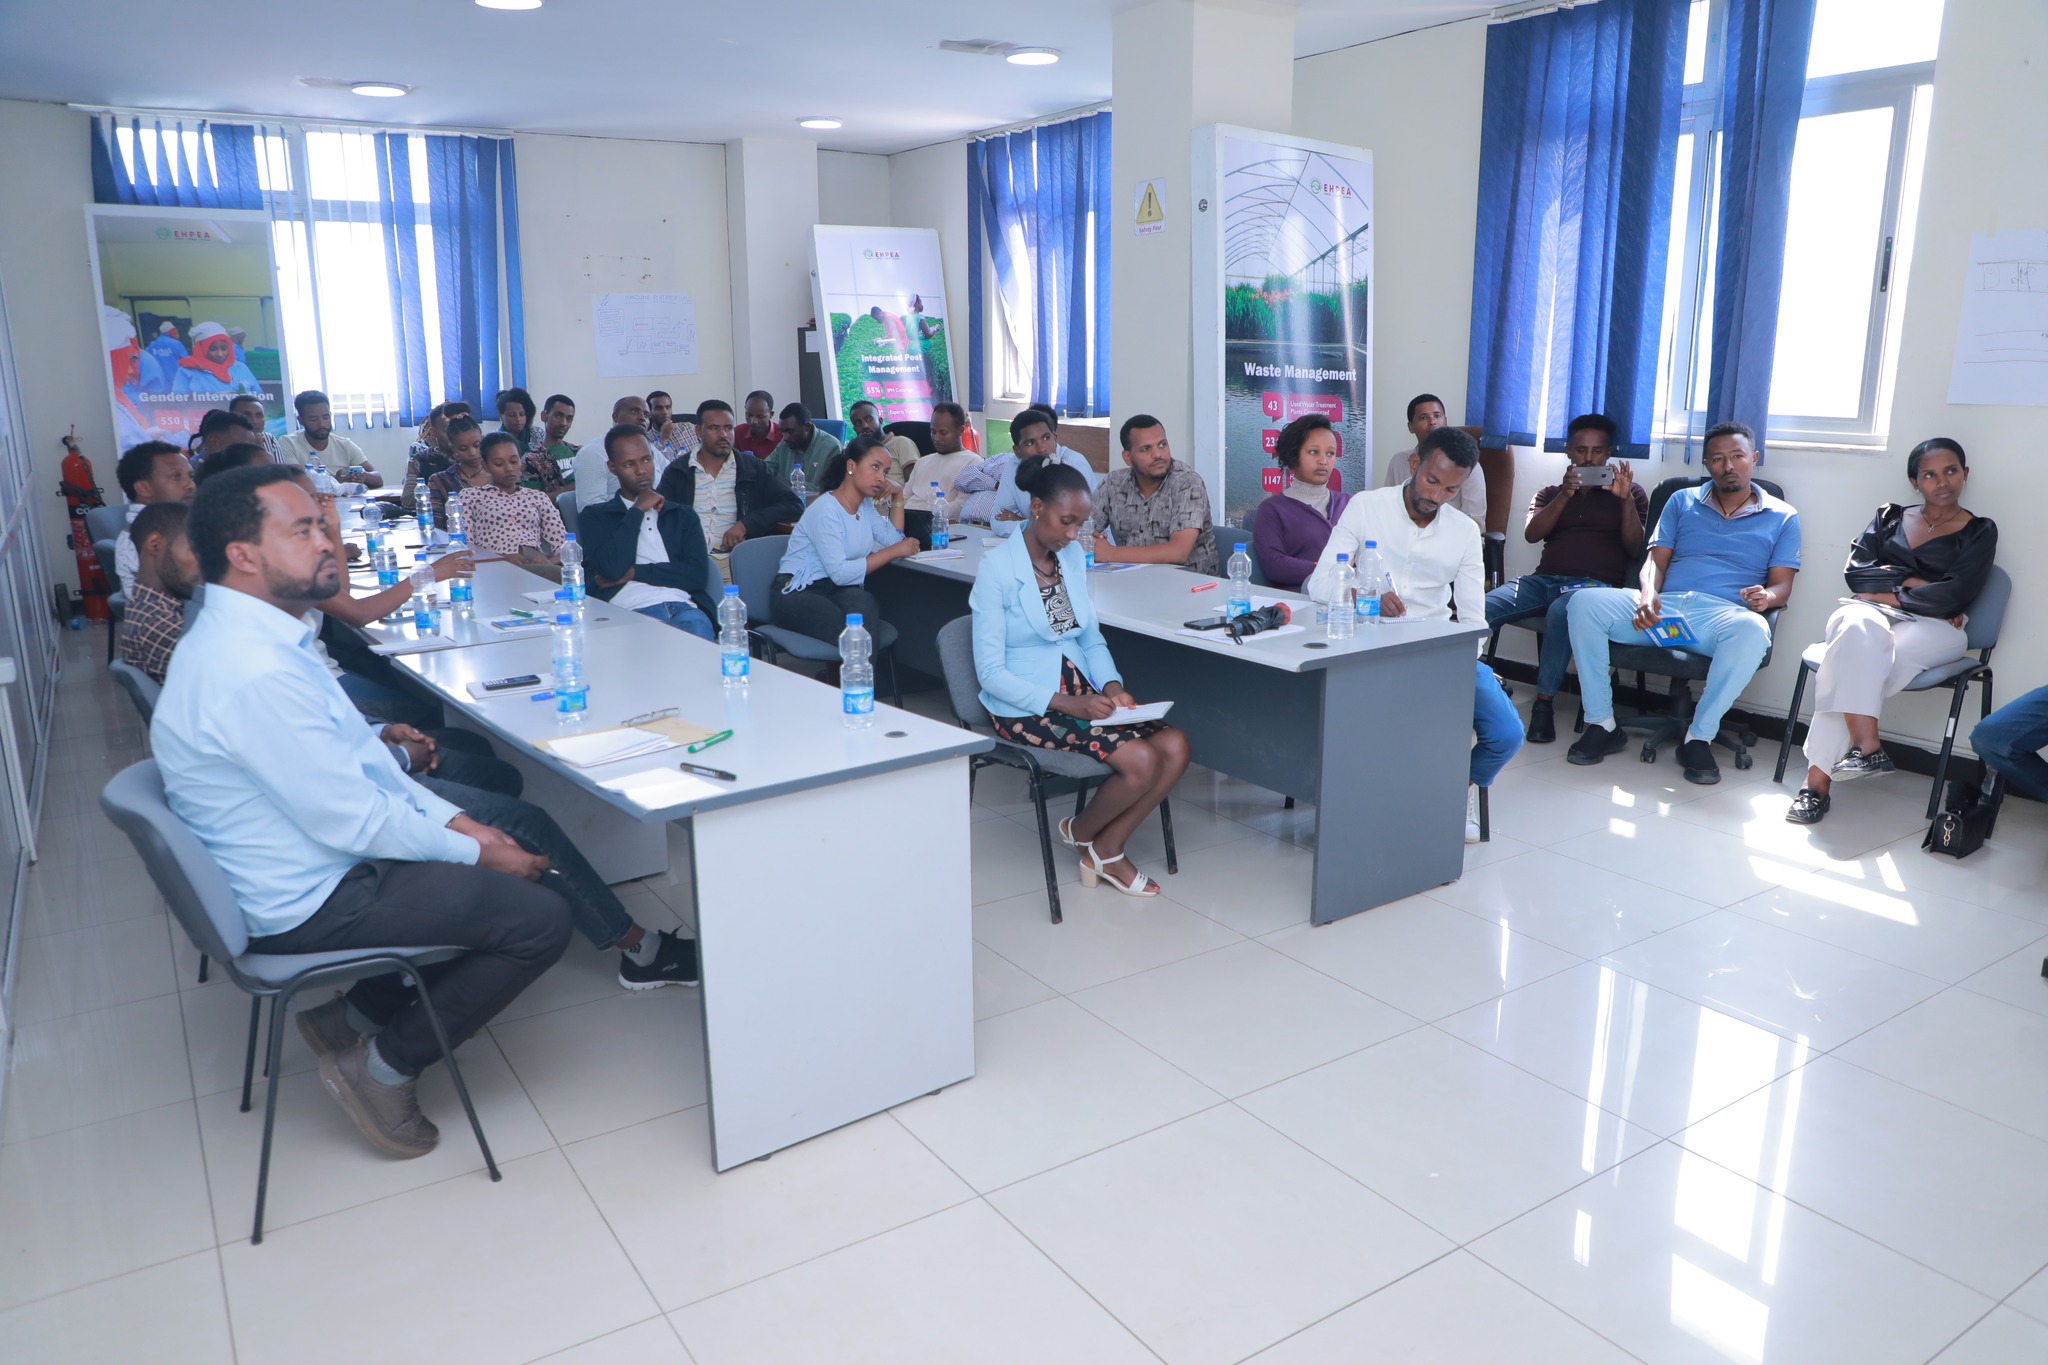 EHPEA TVET center conducted environmental sustainability training for its member farms